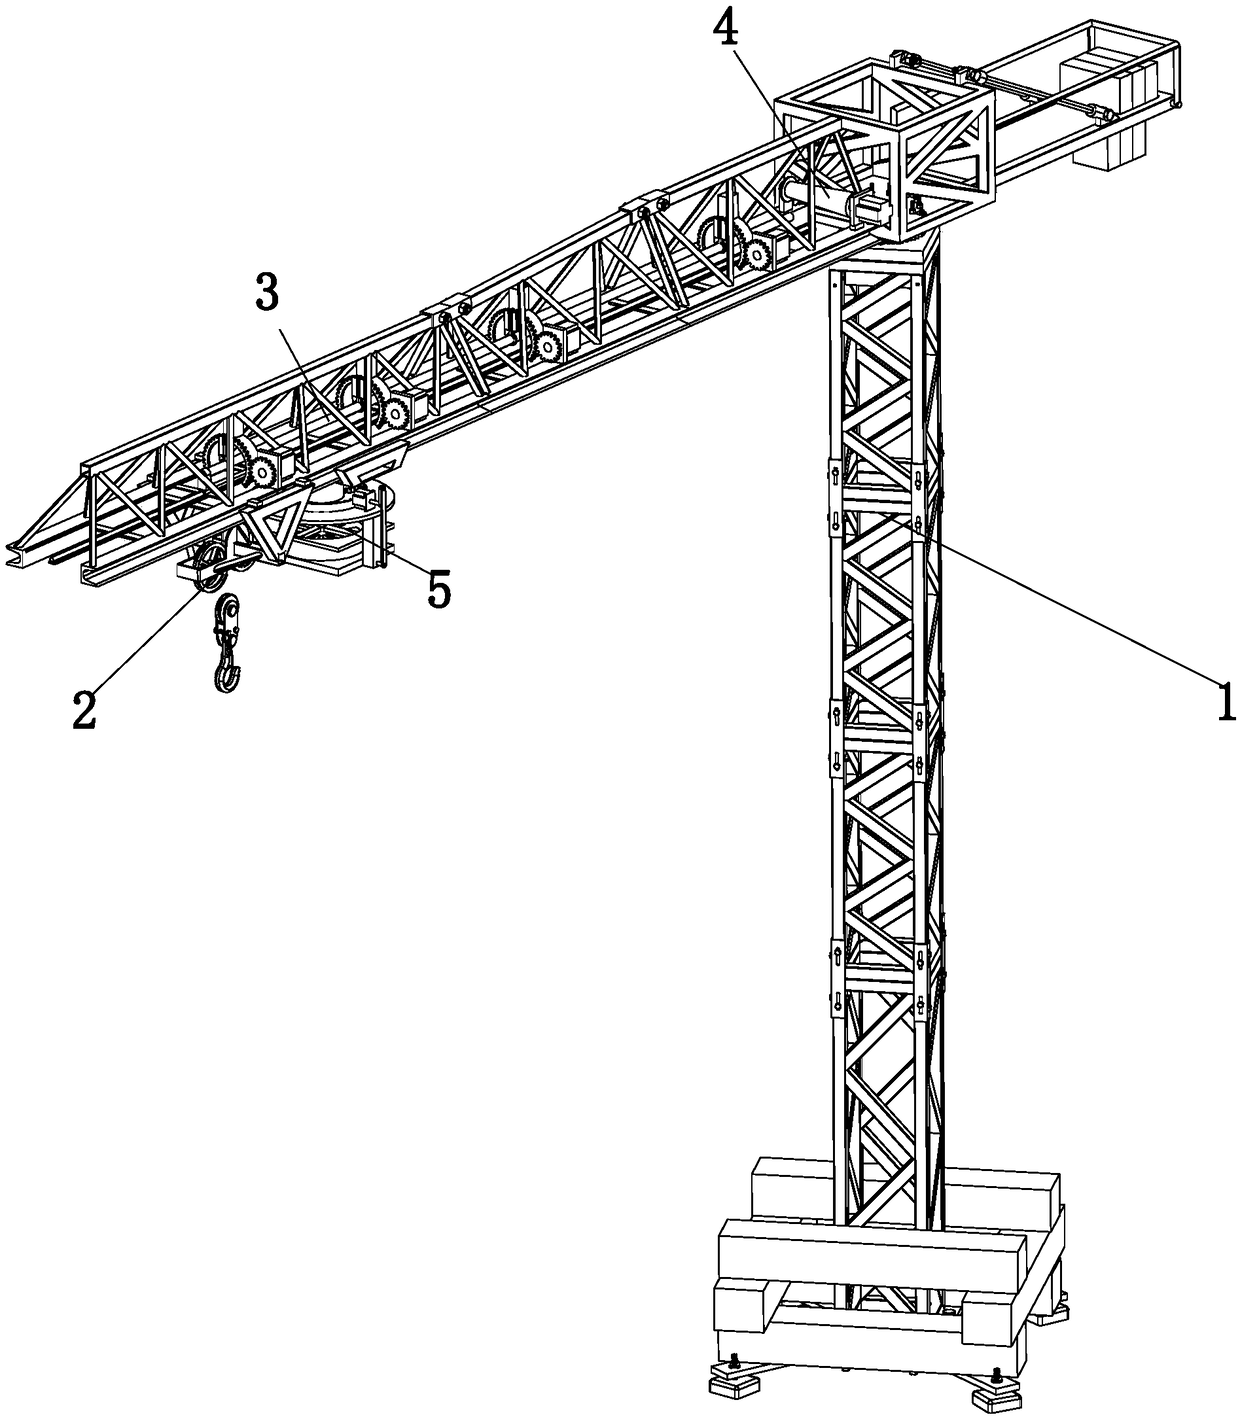 Working method of tower crane spraying device capable of improving dust removing effect in construction site